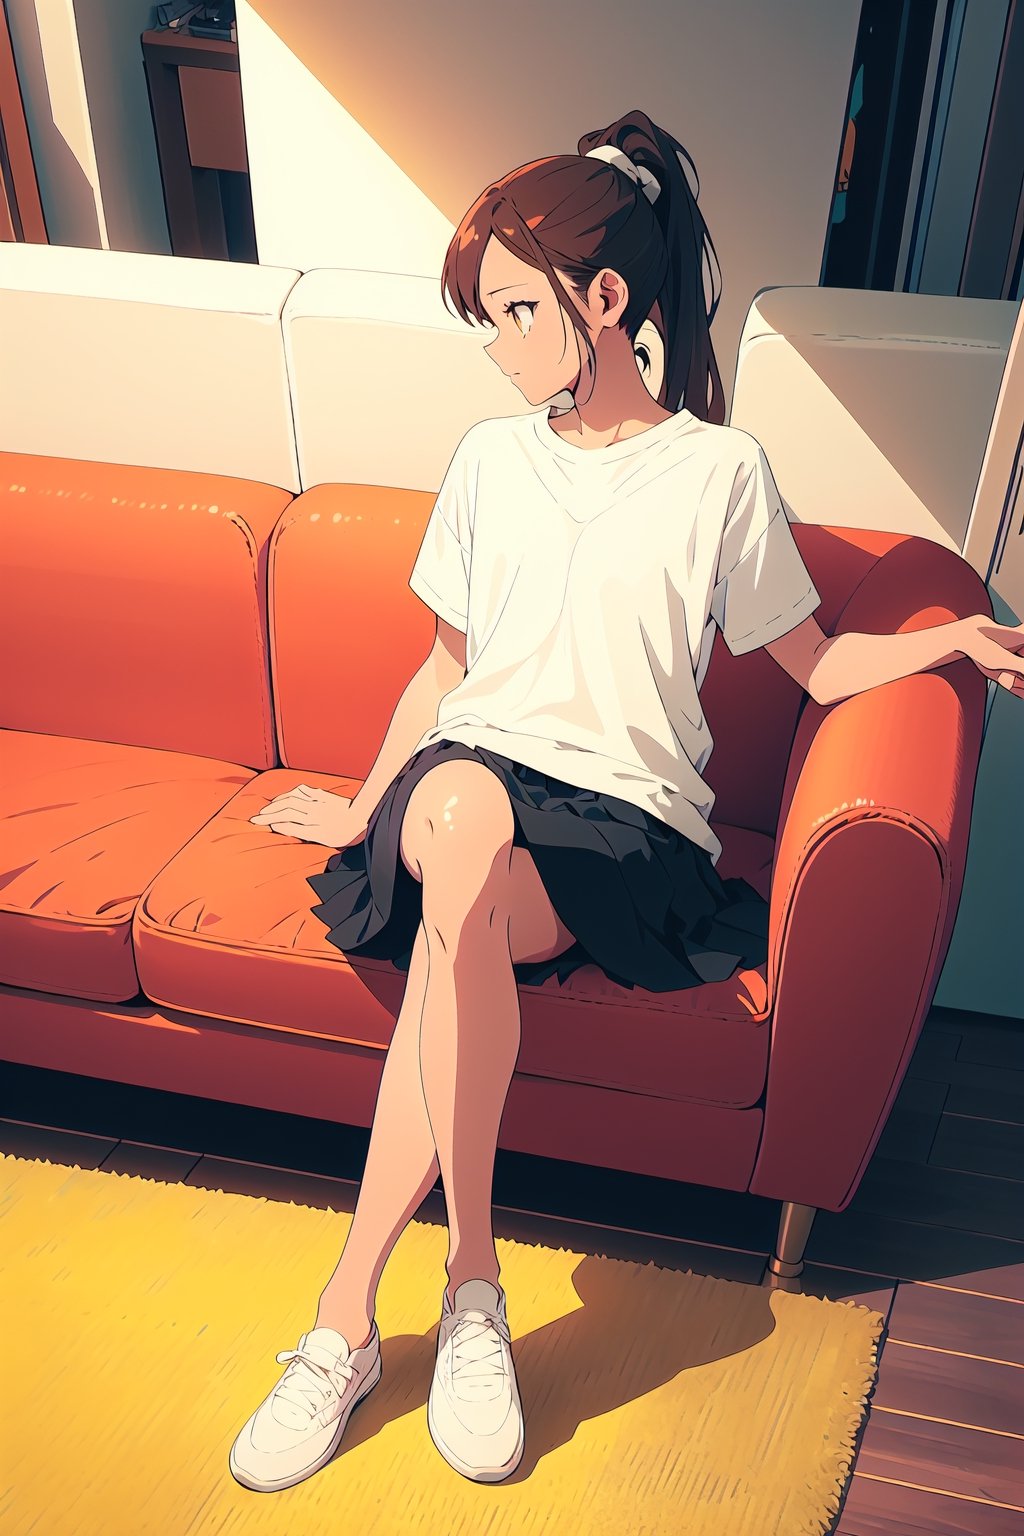 1girl,25 years old,ponytail,brown eyes,brown hair,portrait, white sportswear,white t-shirt, vintage skirt,thights,crossed legs,illustration,fcloseup,rgbcolor, full_body, sitting, vintage sofa,front view, looking_at_viewer, smug look,photostudio,emotion,body looking forward, midnight